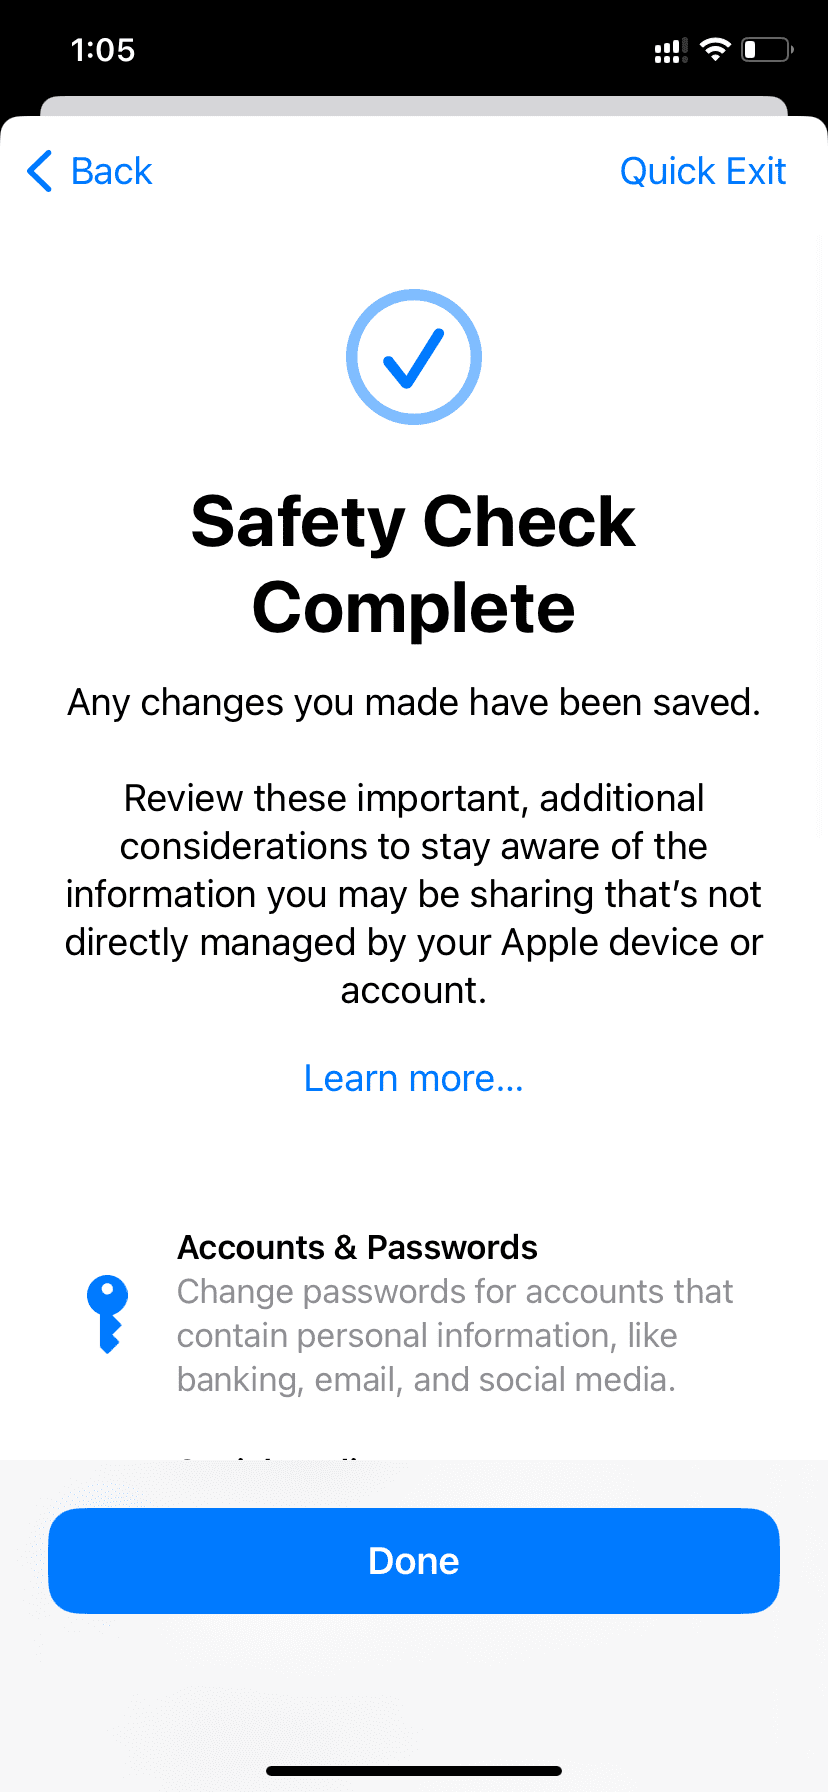 Safety Check Complete on iPhone